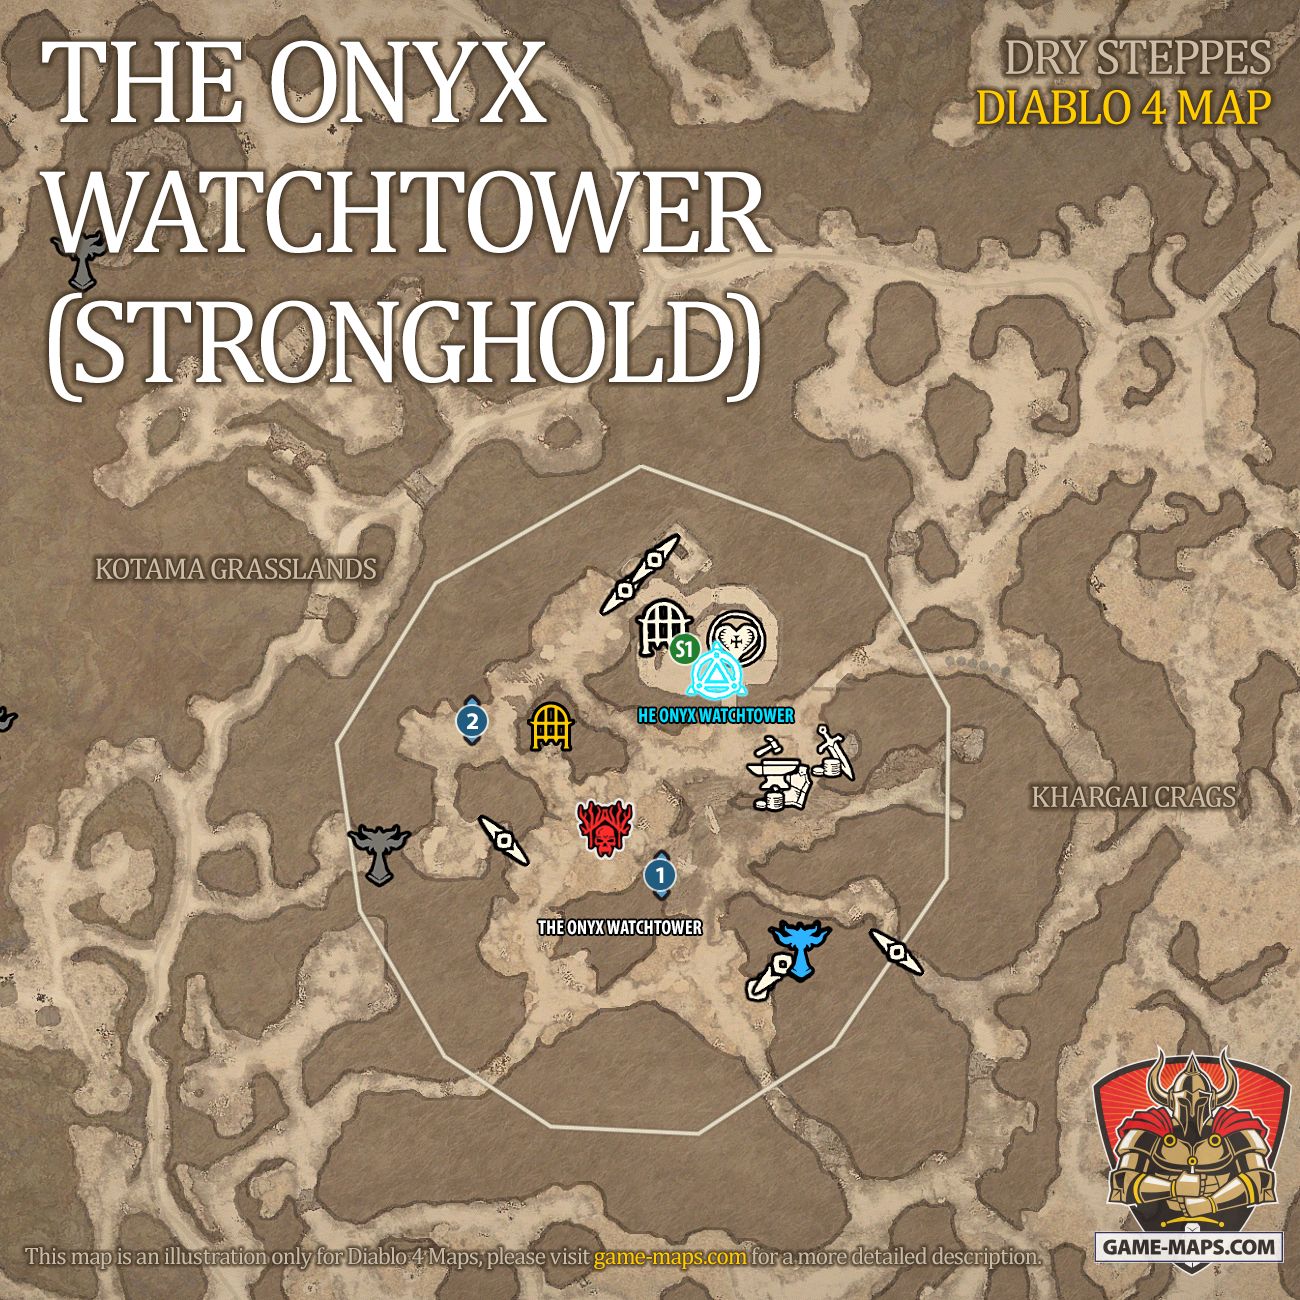 The Onyx Watchtower Map (Stronghold) Diablo 4